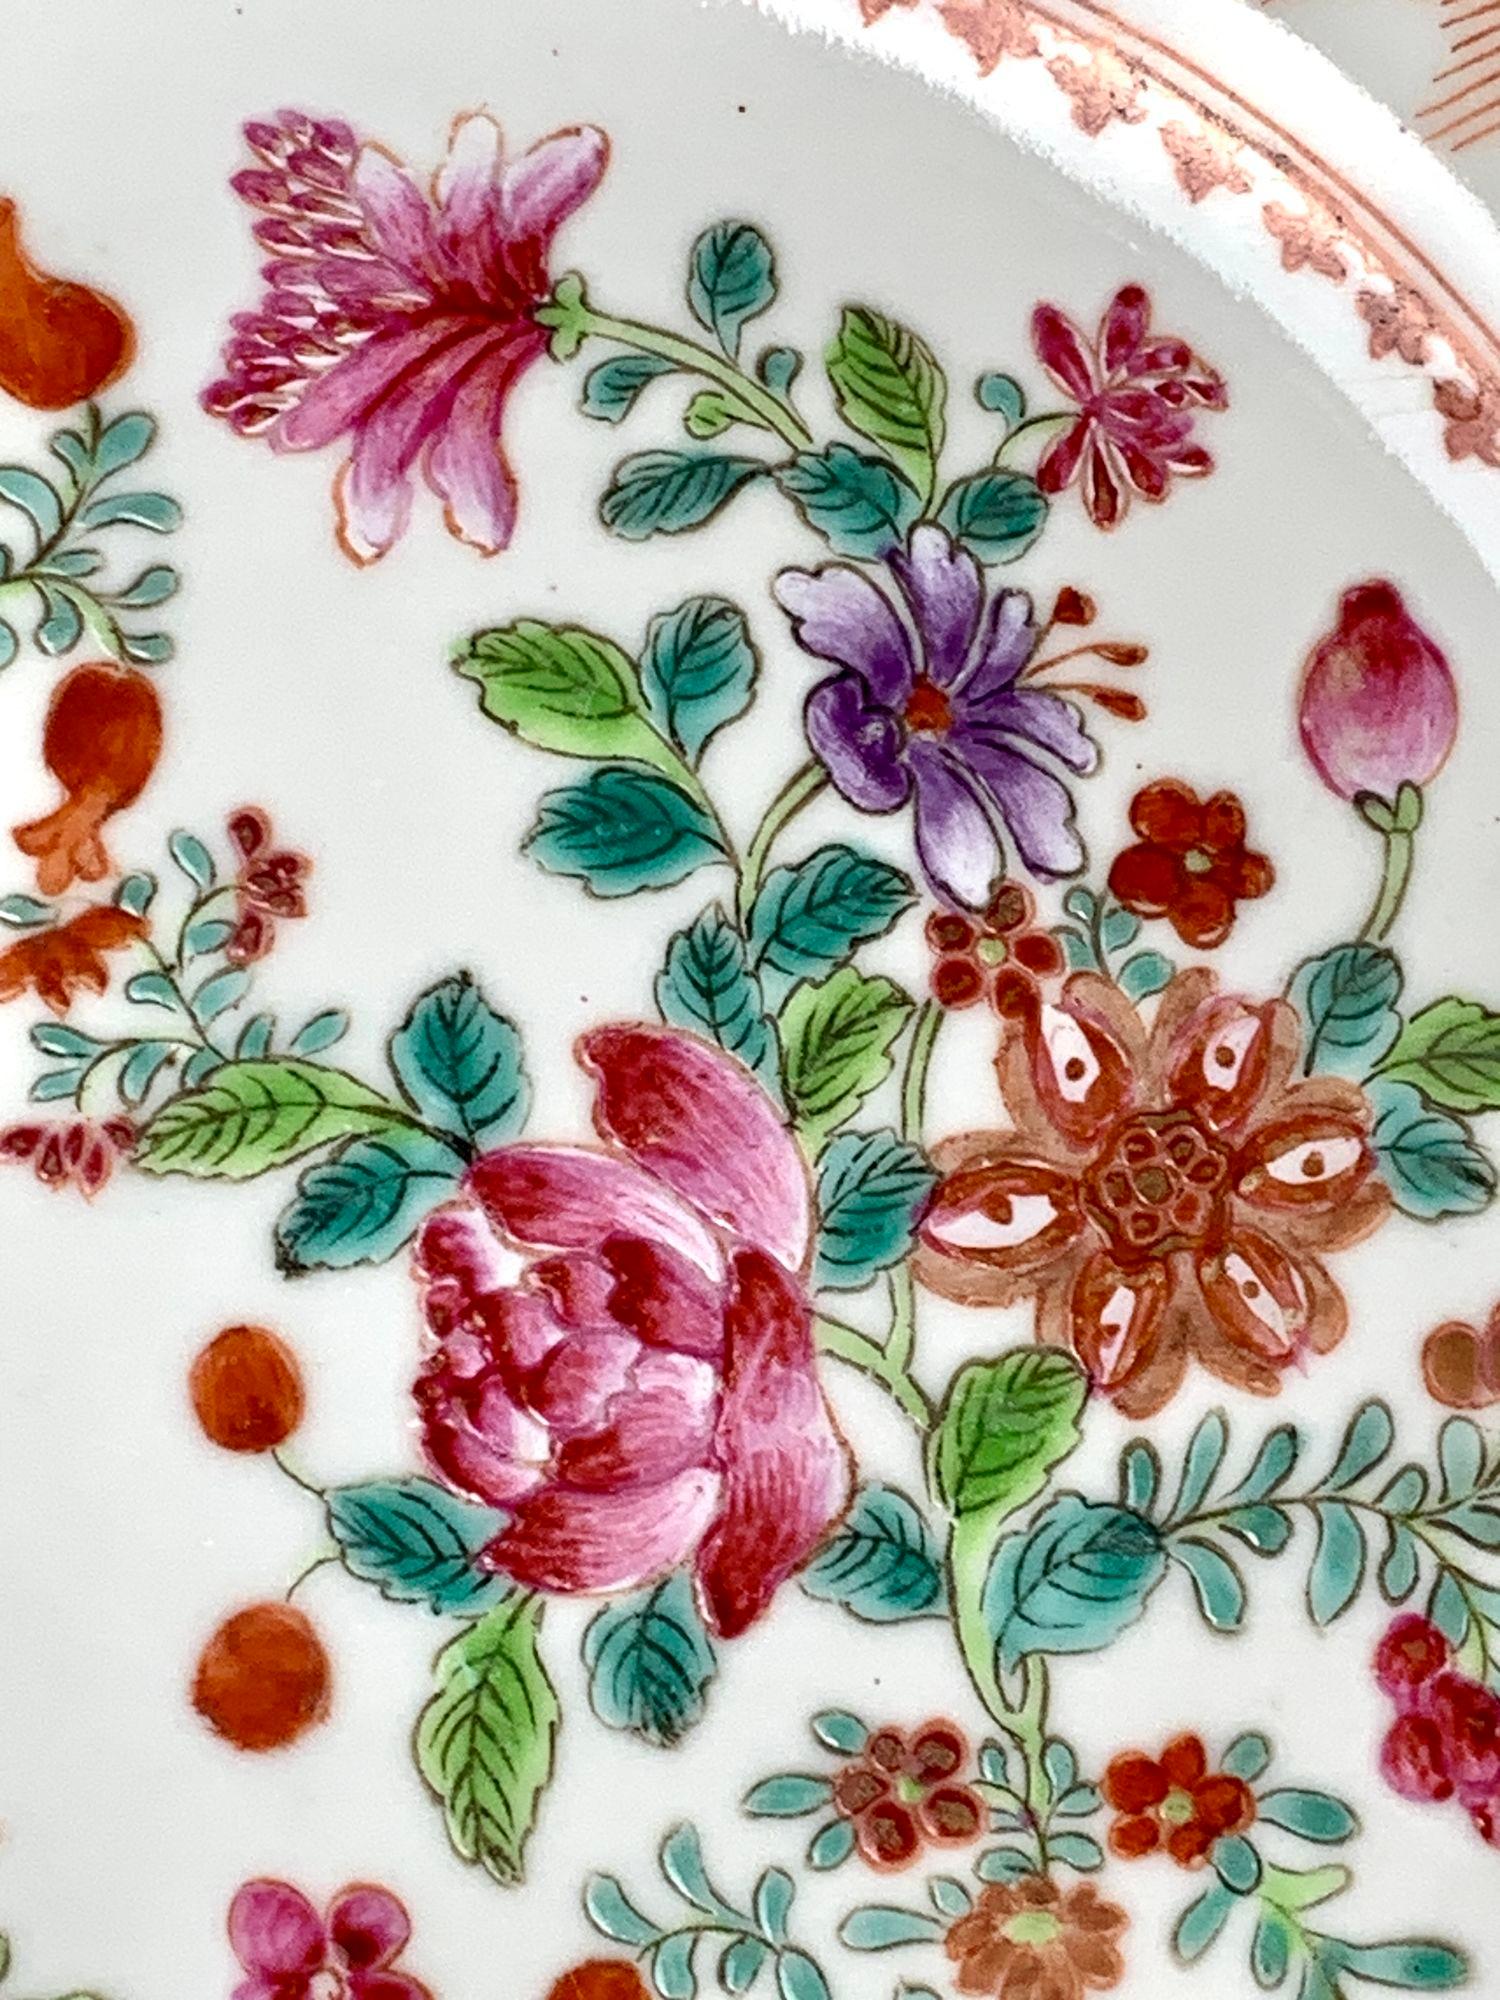 This set of four Chinese porcelain dishes are hand painted in Famille Rose colors.
The center is filled with beautiful flowers separated by leaves in two tones of green.
The predominant colors are pink, orange, green, and turquoise with small